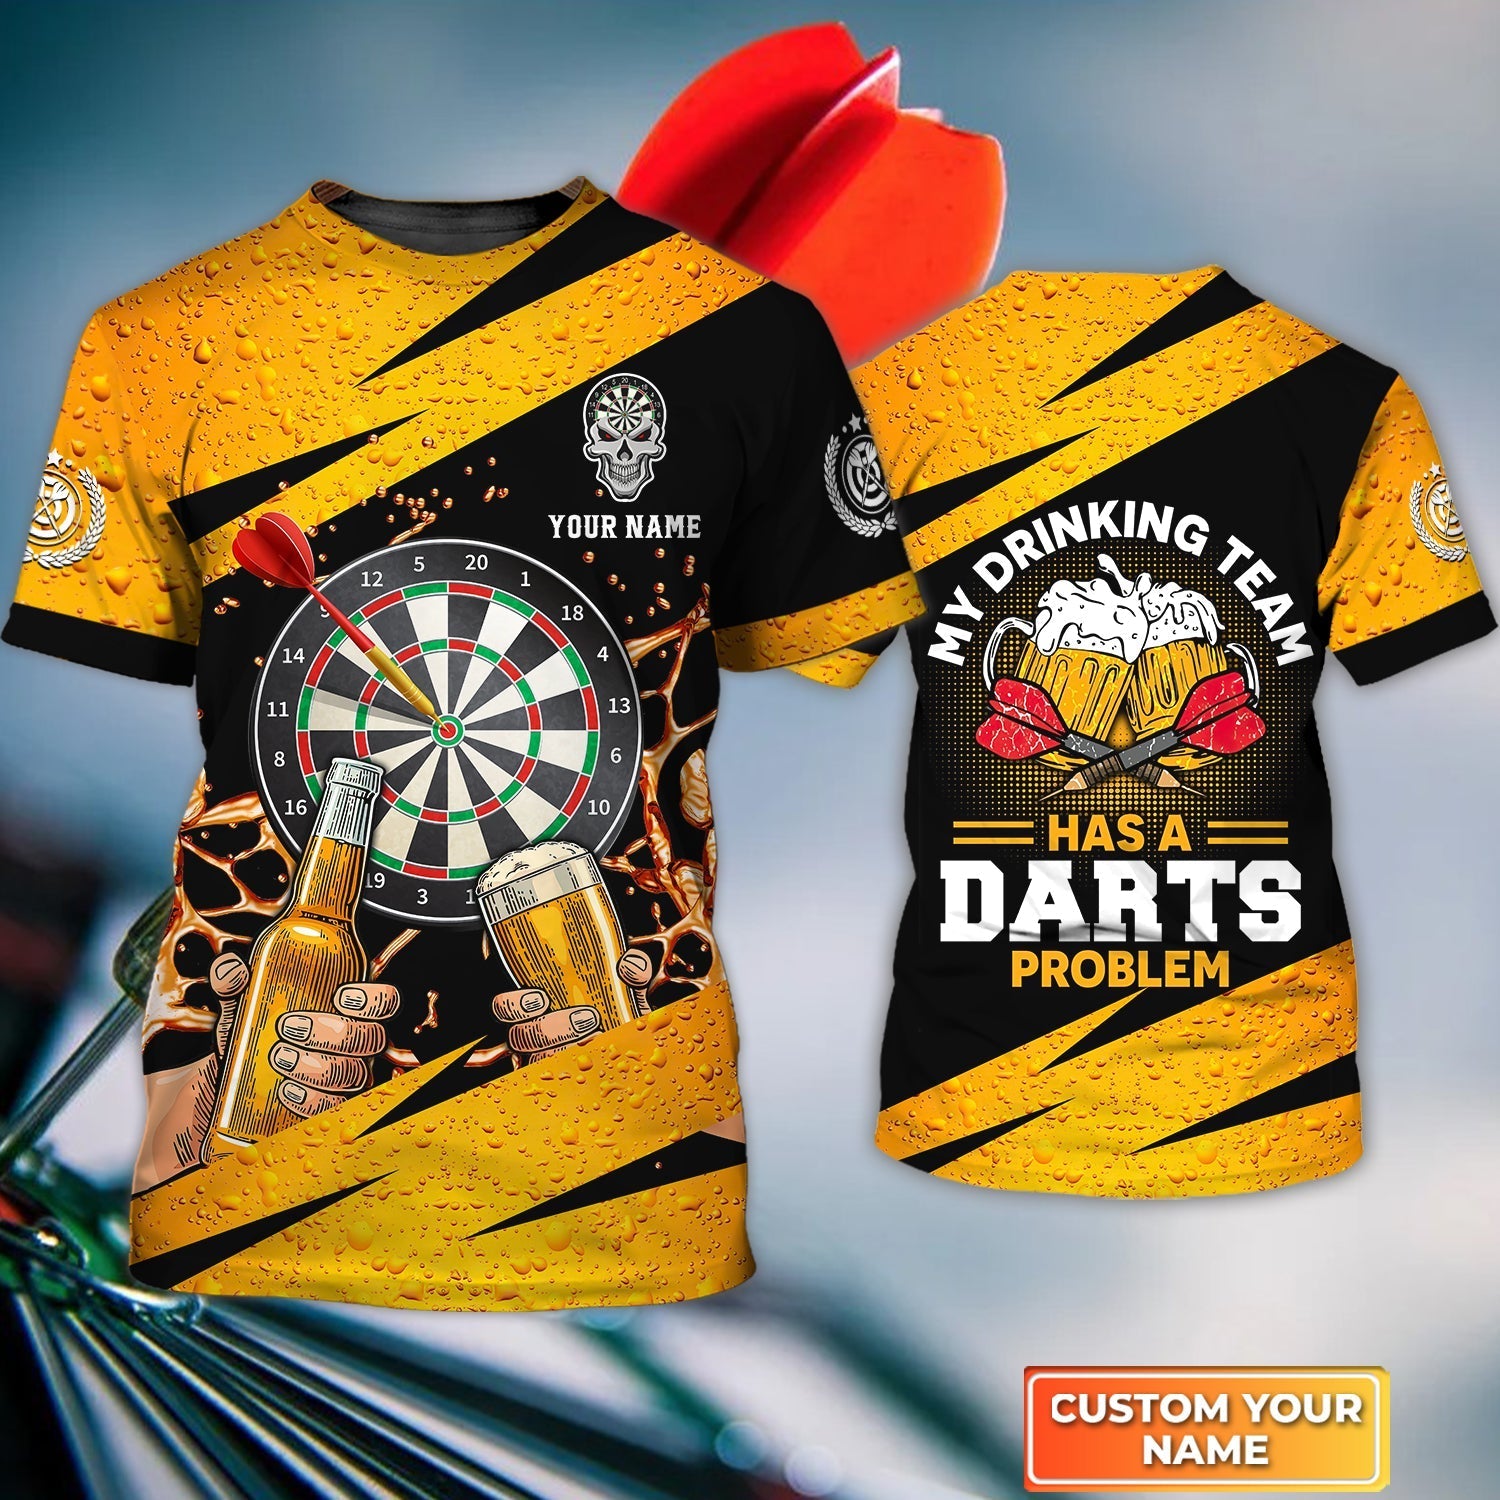 I’D Hit That Darts Personalized Name 3D Tshirt, gift For Darts Player – DT150